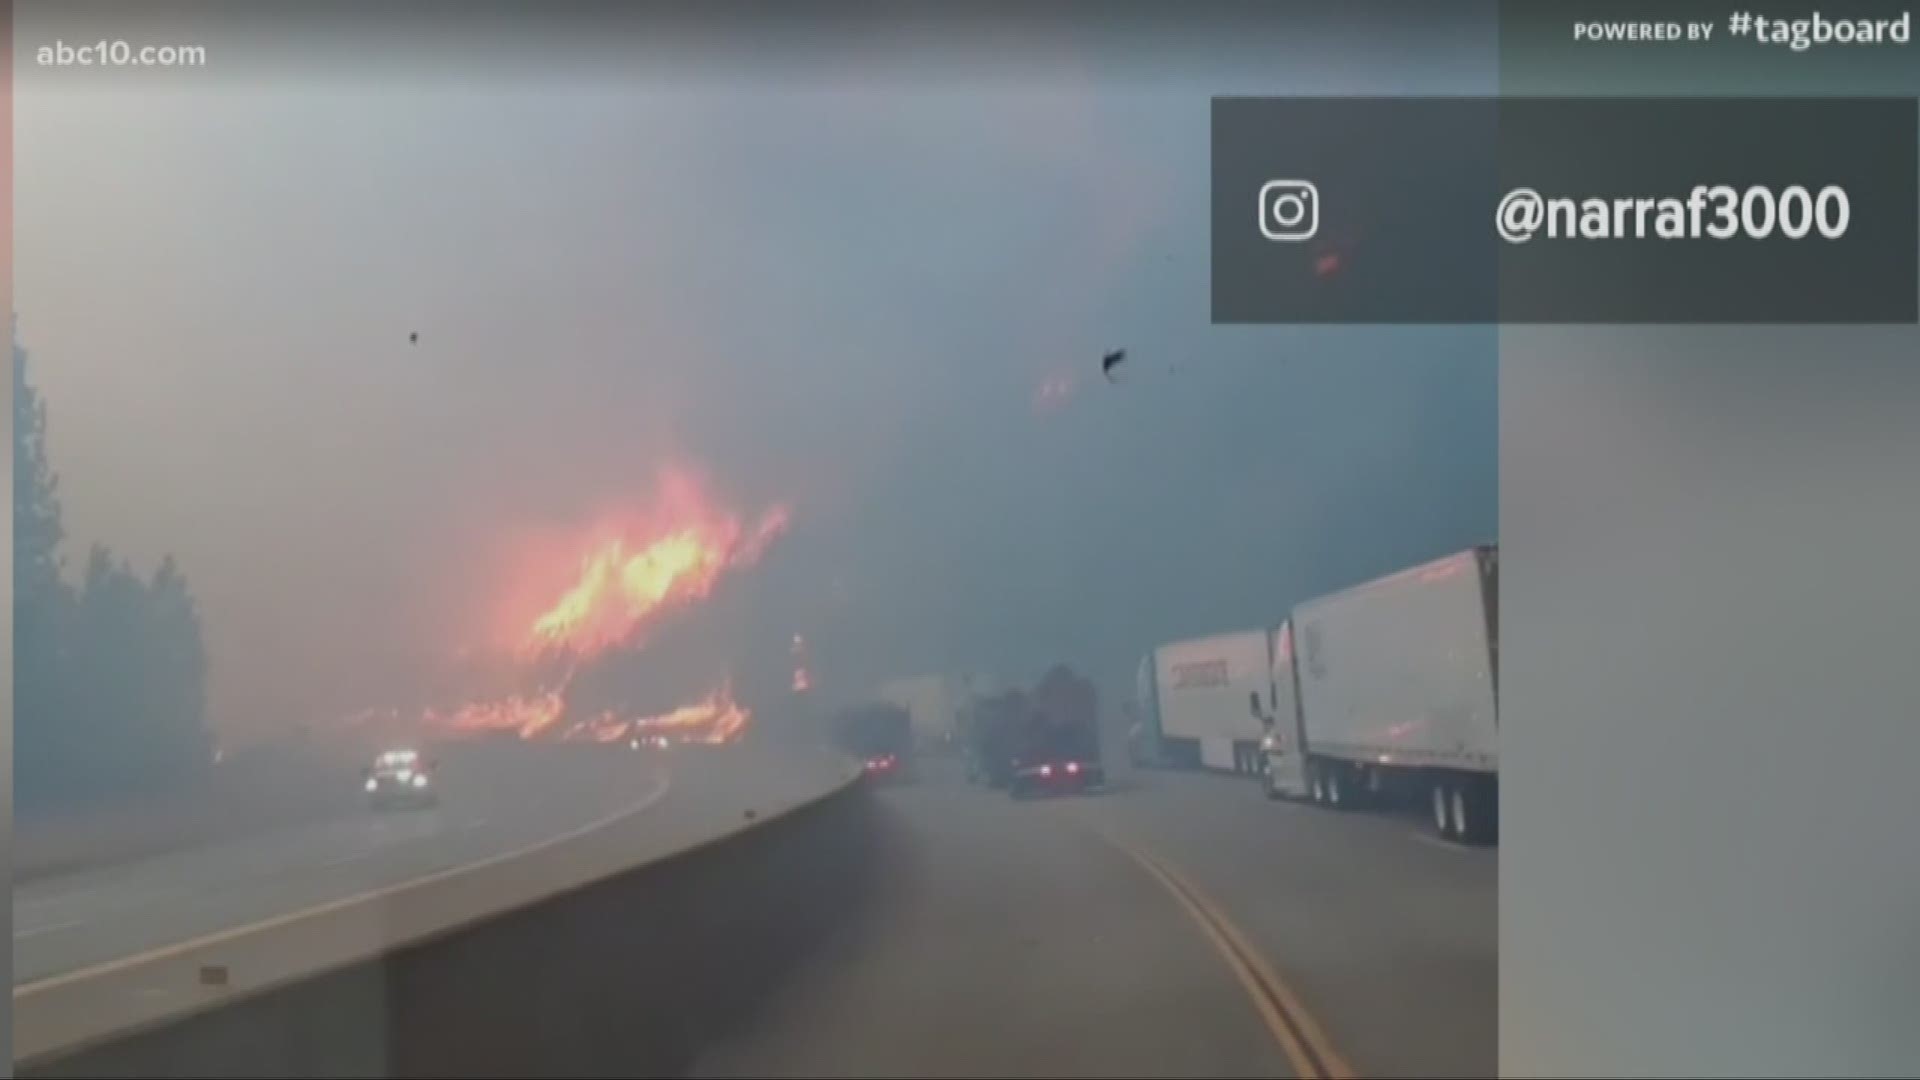 Remember the instagram video we shared of one woman describing the Delta Fire? Well, we've got some good news.